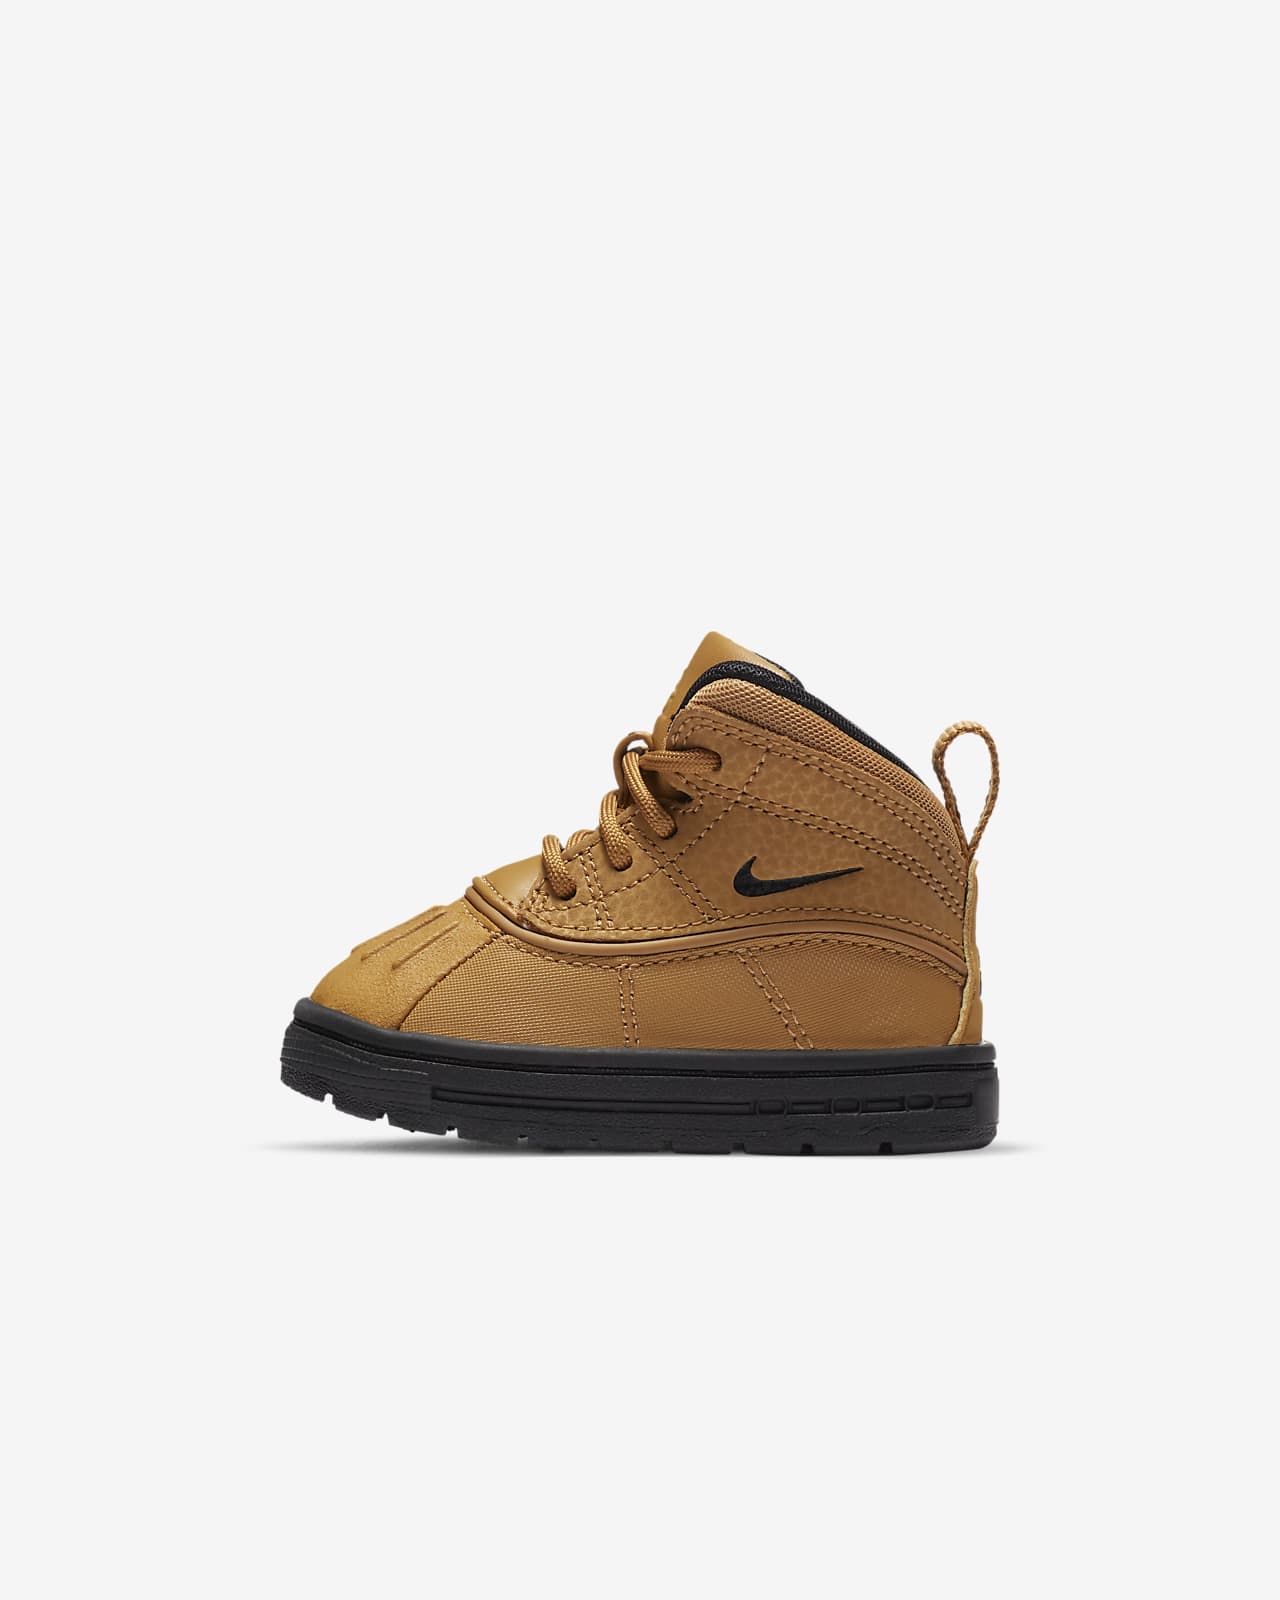 Nike Woodside 2 High ACG Baby/Toddler Boots